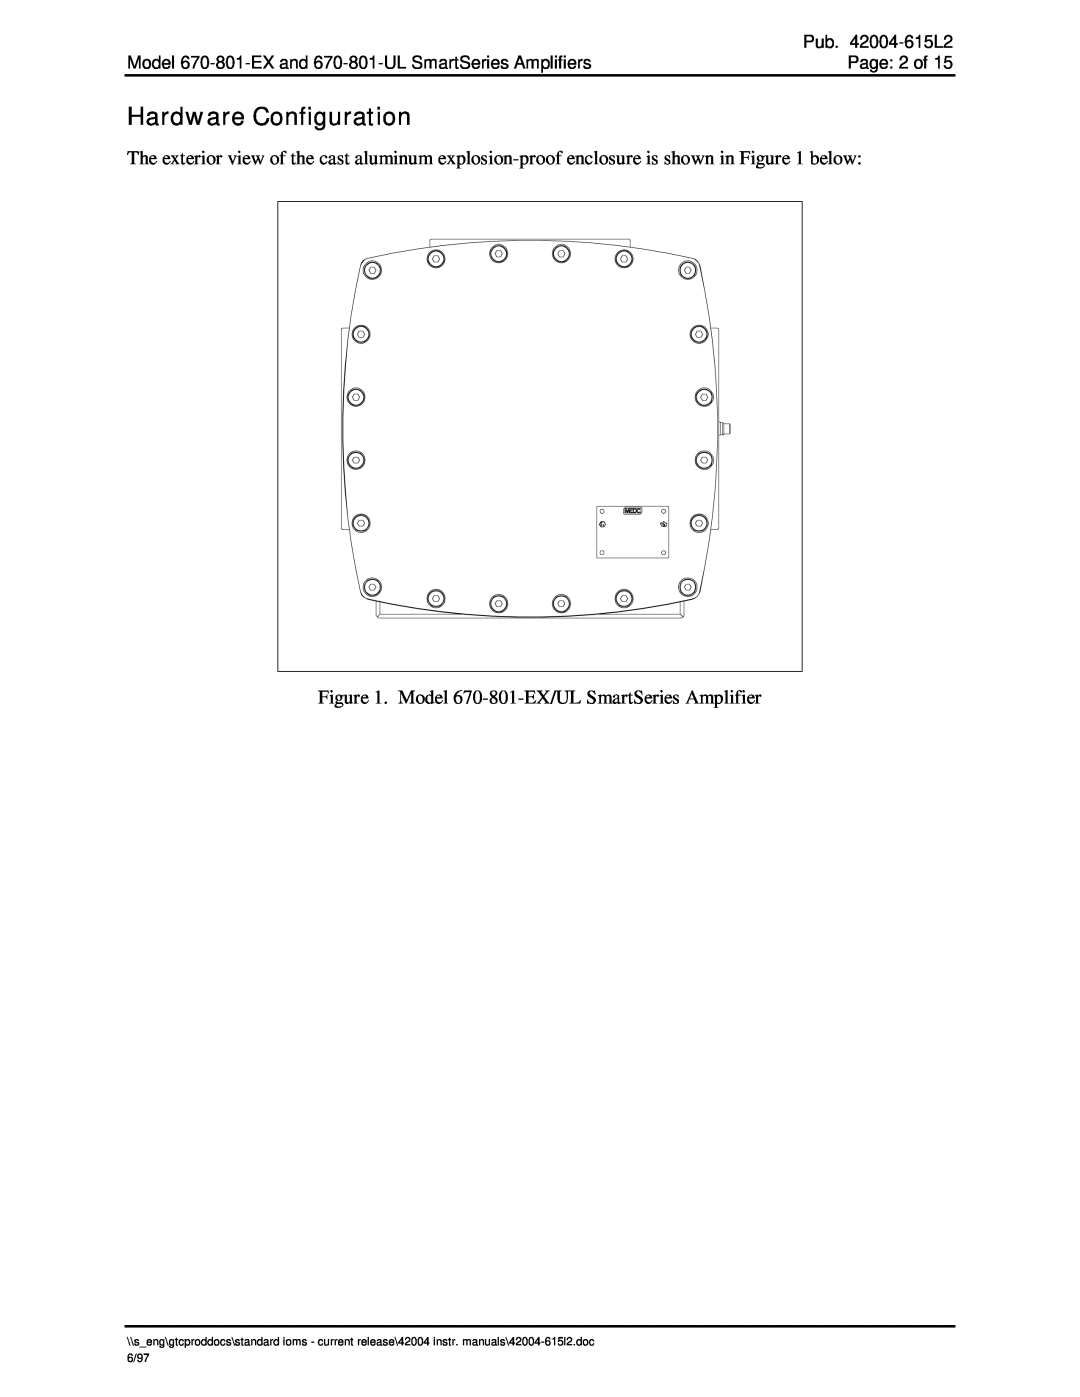 Hubbell 670-801-EX, 670-801-UL manual Hardware Configuration, 42004-615L2, Page 2 of 